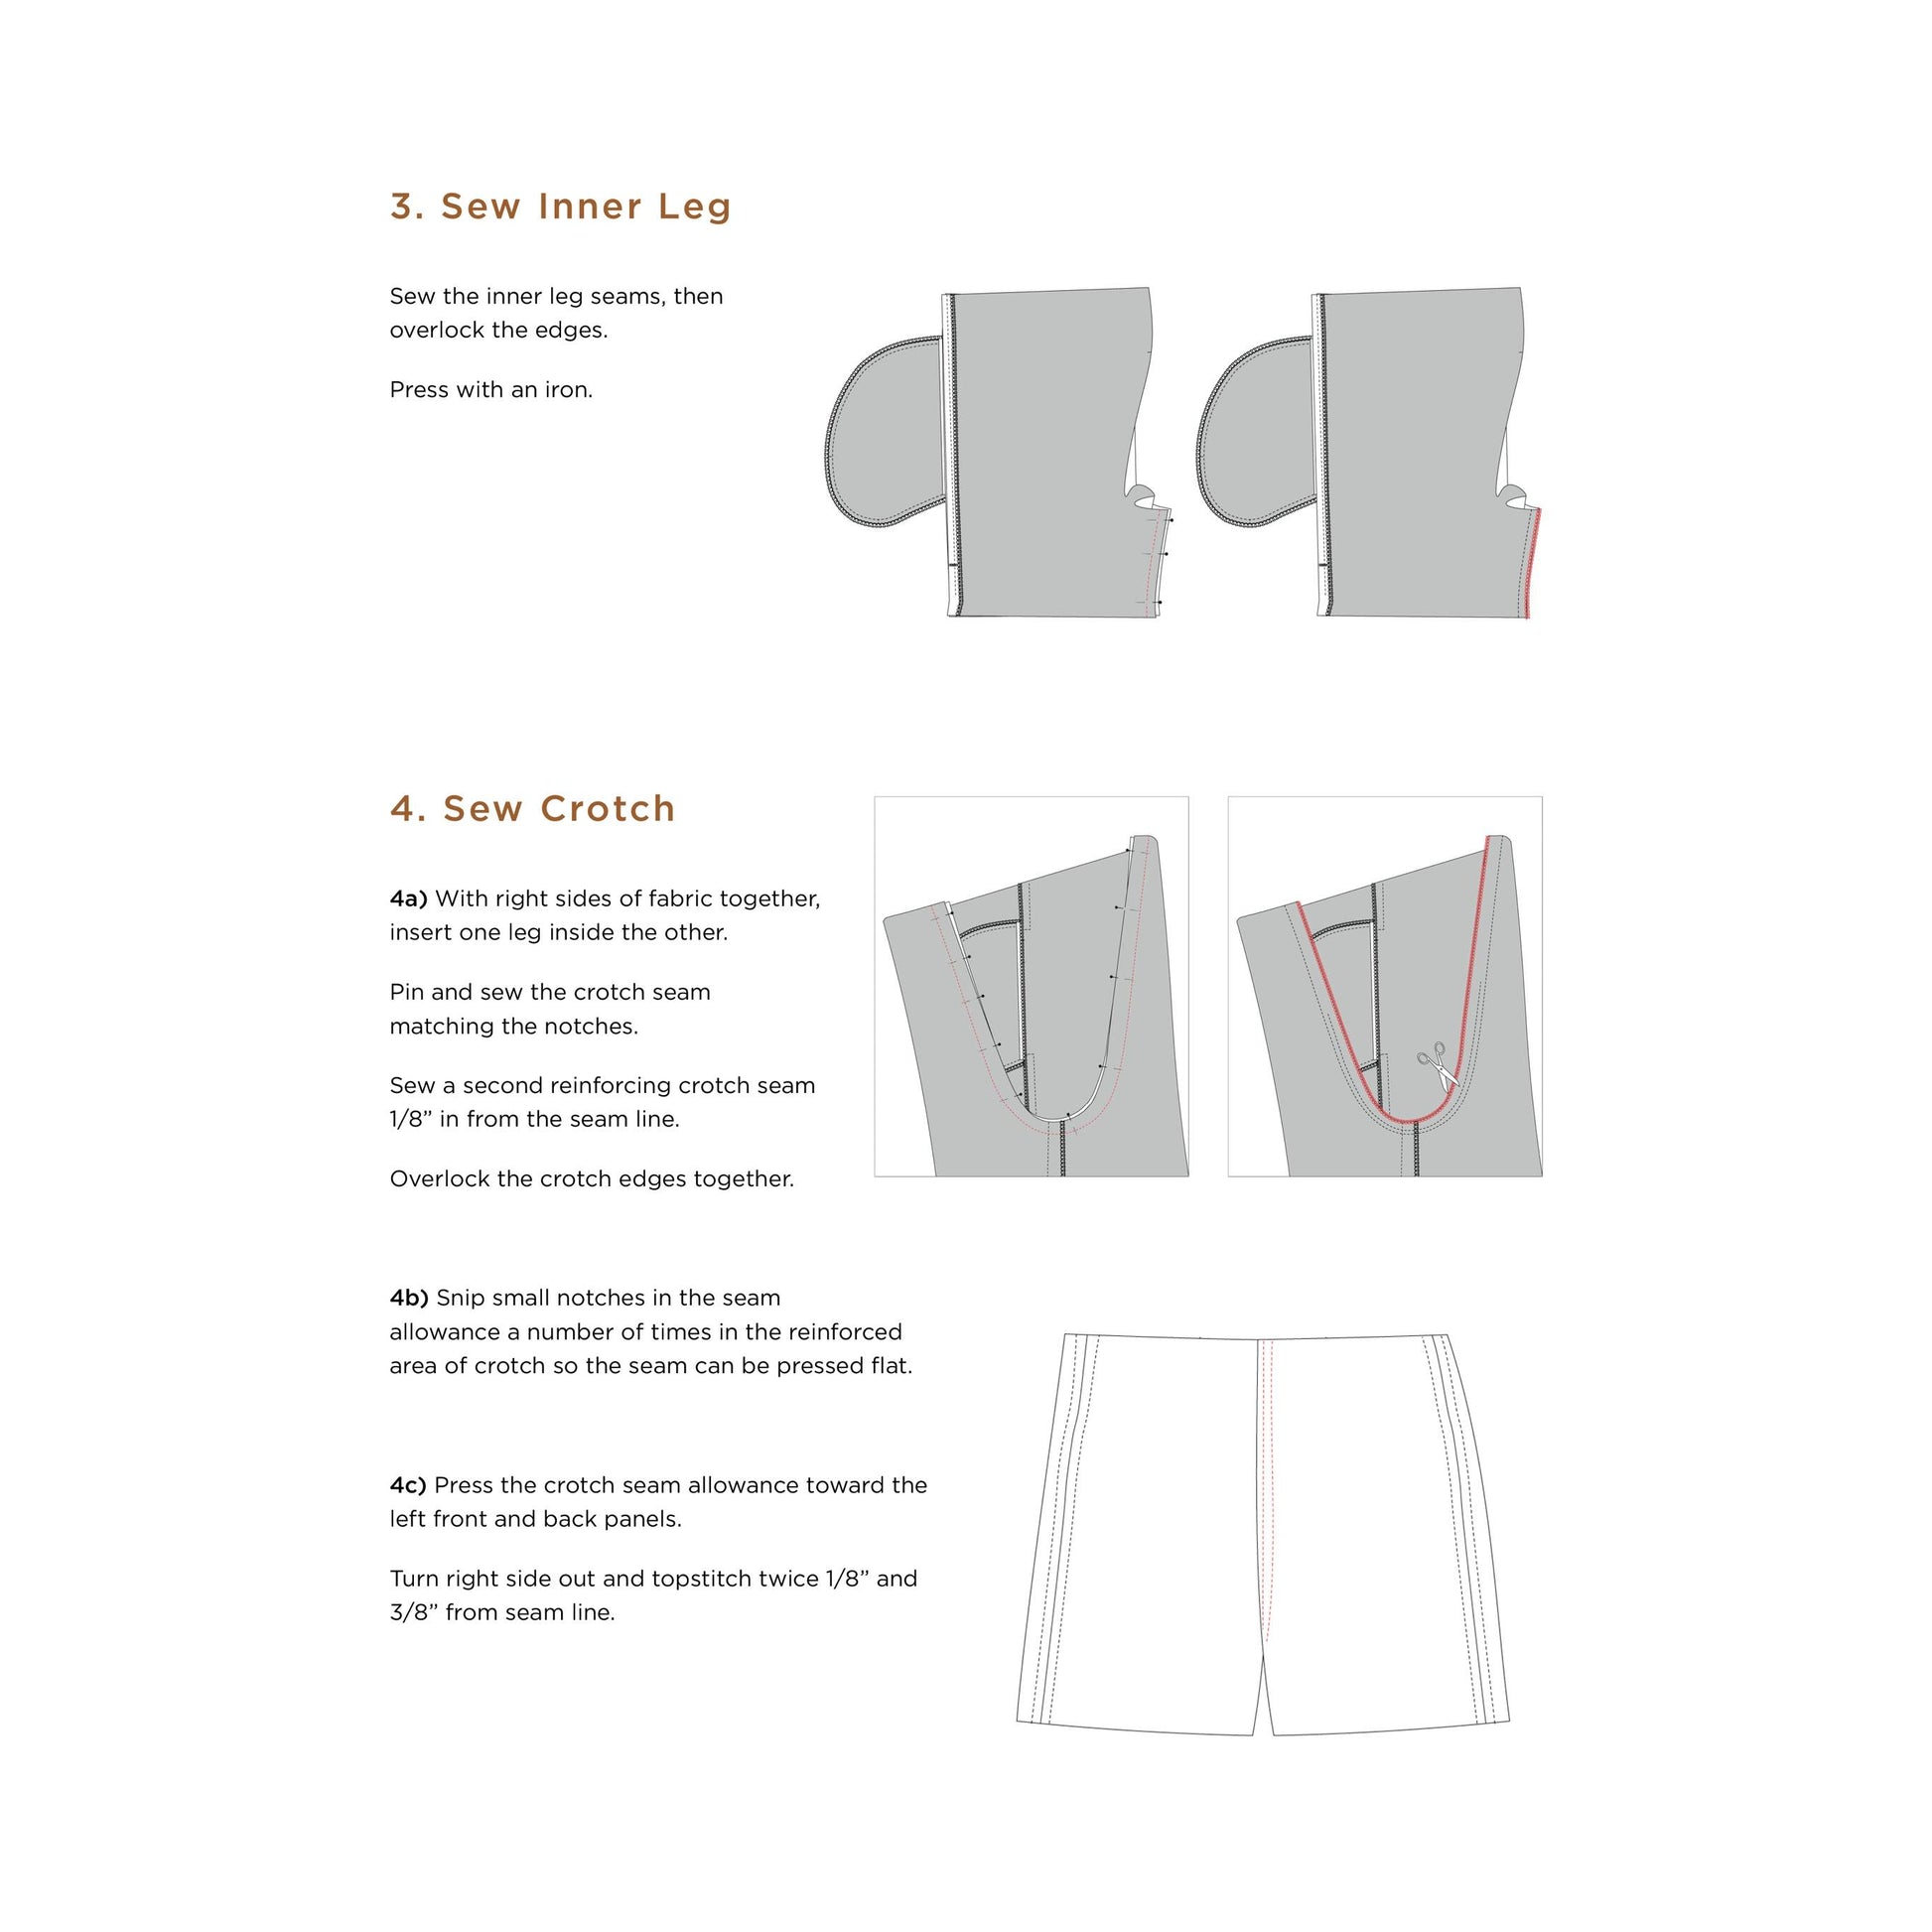 Men's Boxer Shorts Sewing Pattern - Sizes S to 5XL For Men's Gift